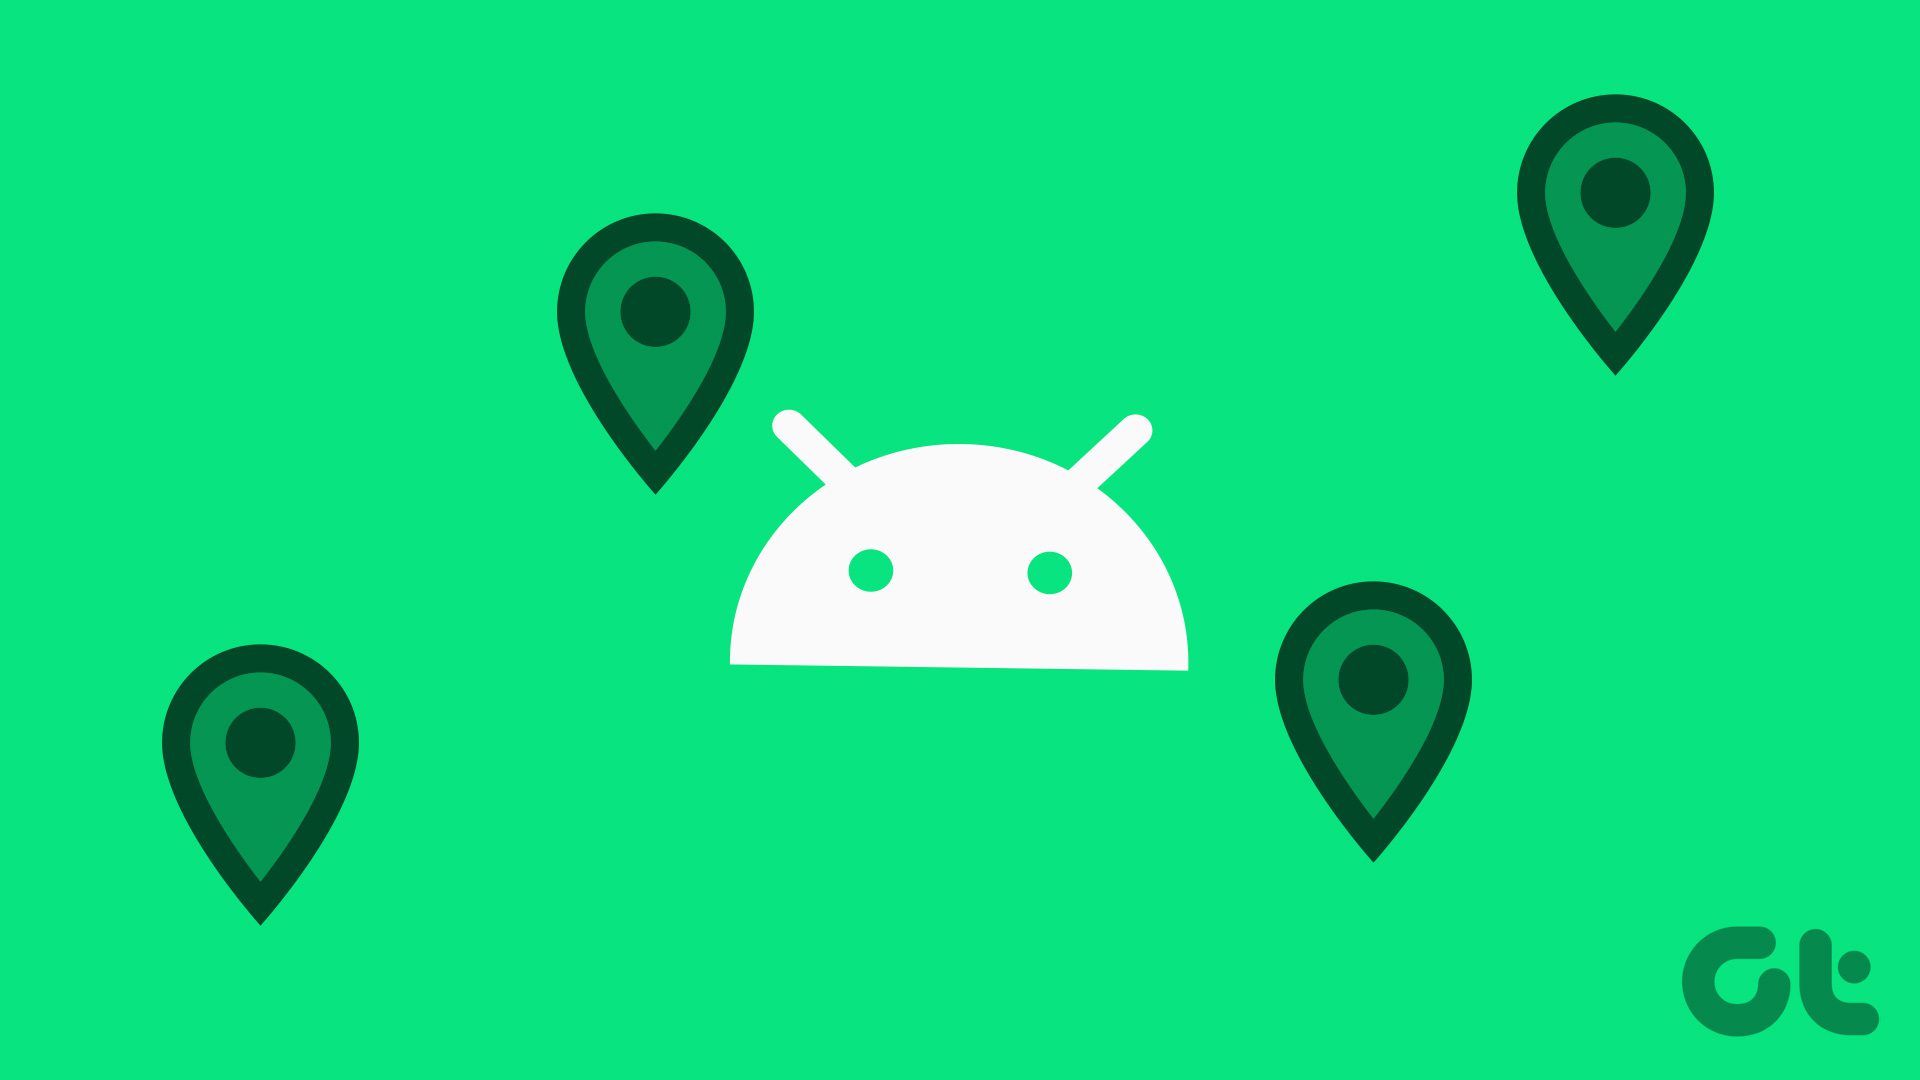 2 Ways to Change or Spoof Your Location on Android